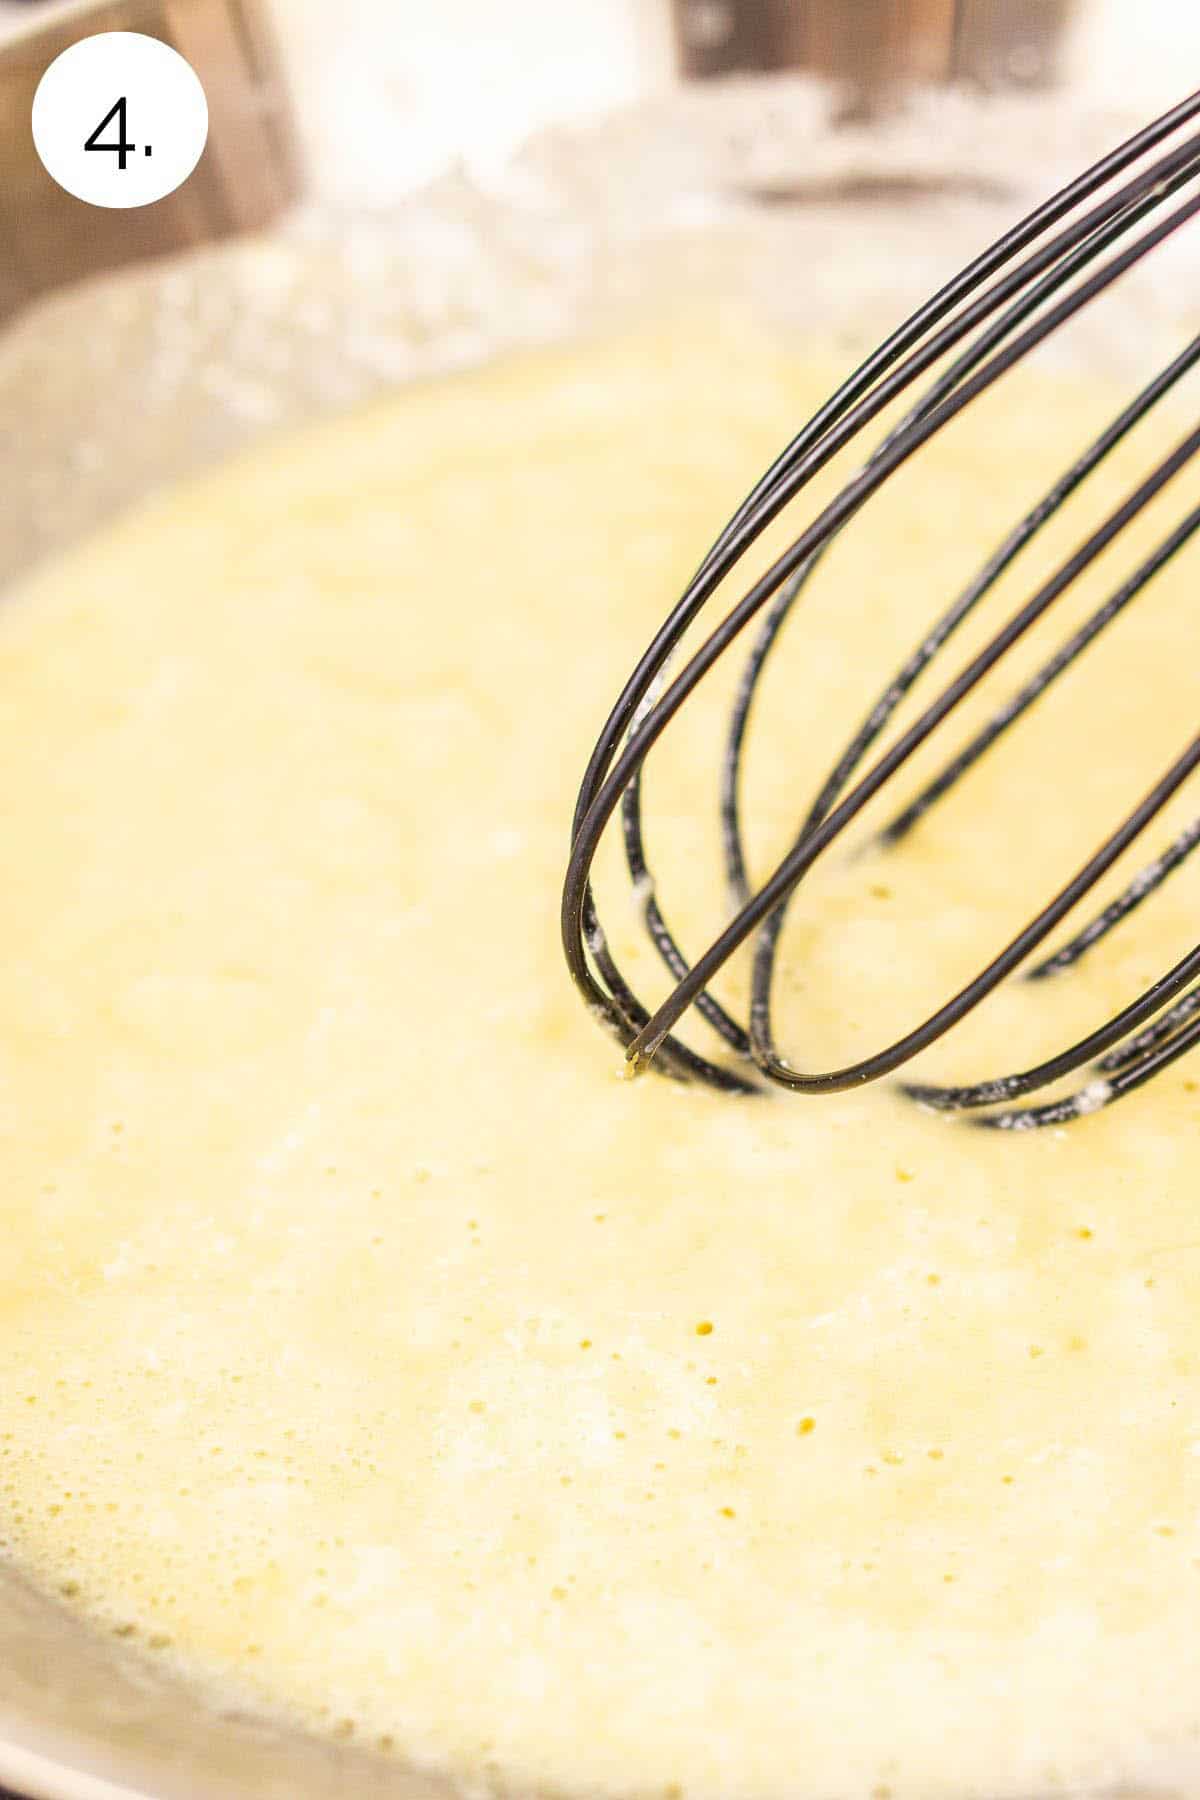 Whisking the butter, garlic and flour in a skillet on the stove to make the early stage of the roux.